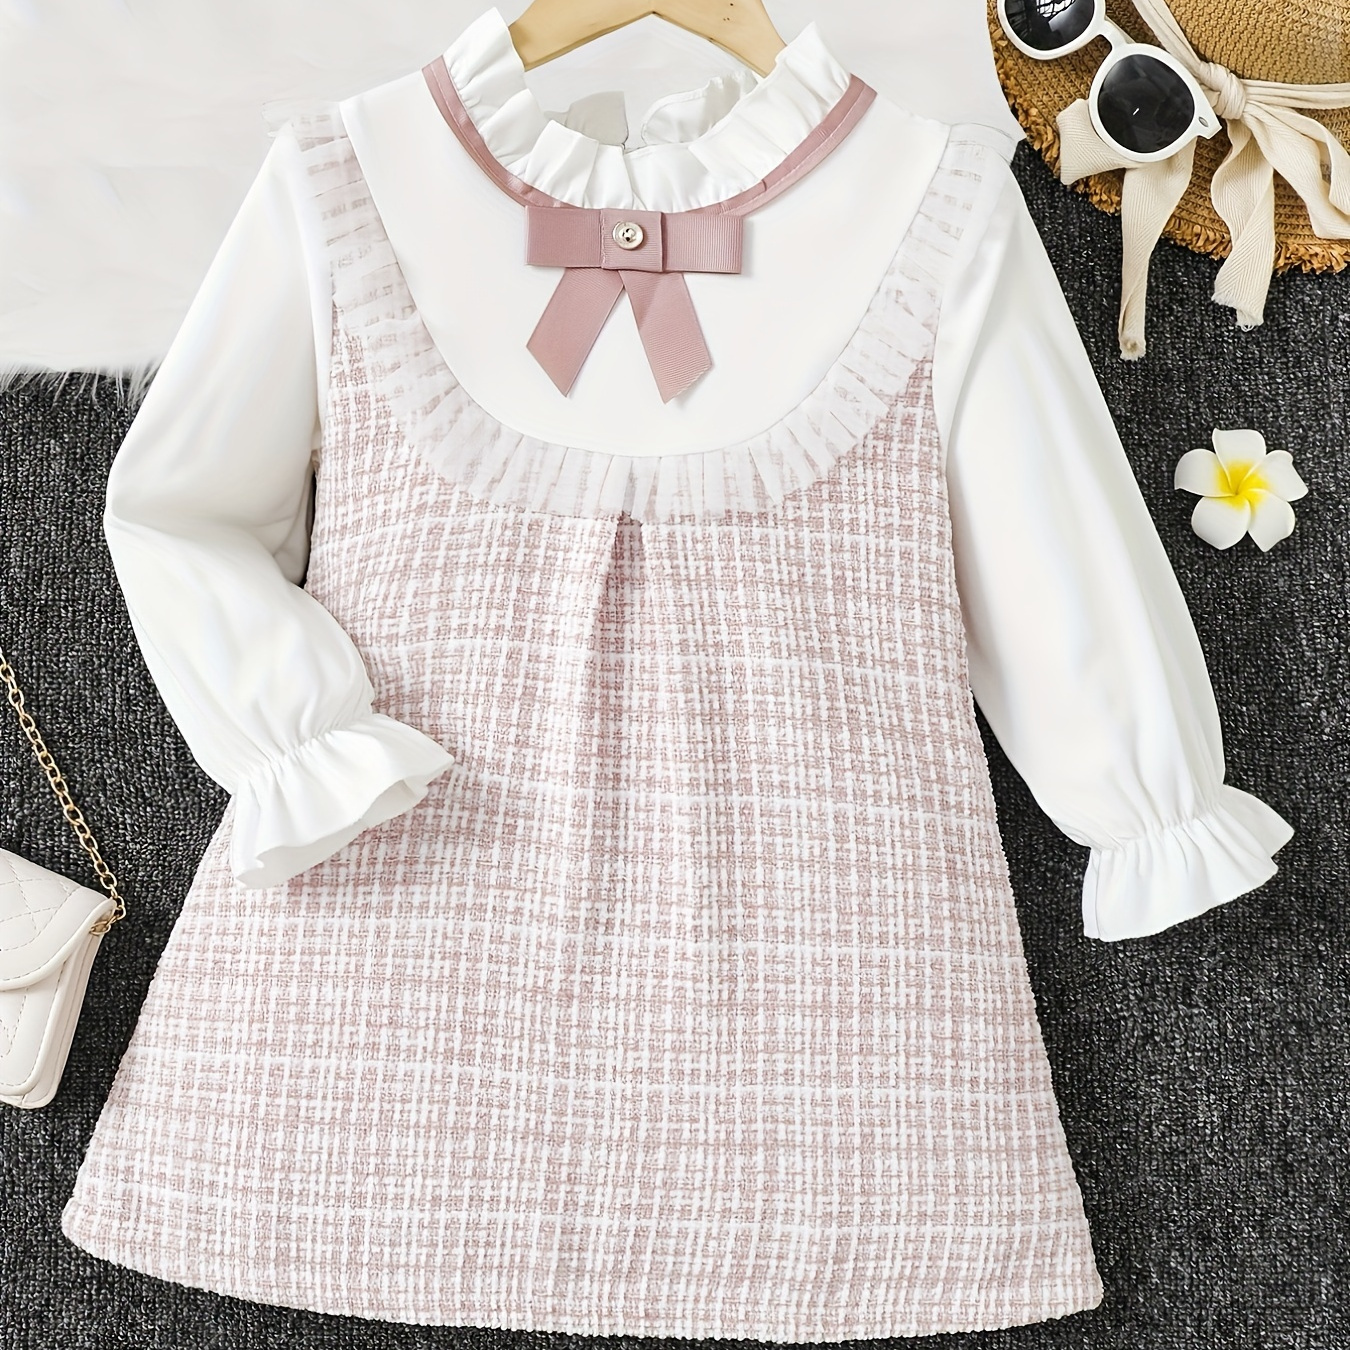 

Girls Elegant Trendy Cute Stitching Mesh Dress With Plaid Print For Summer Holiday Party Kids Clothes